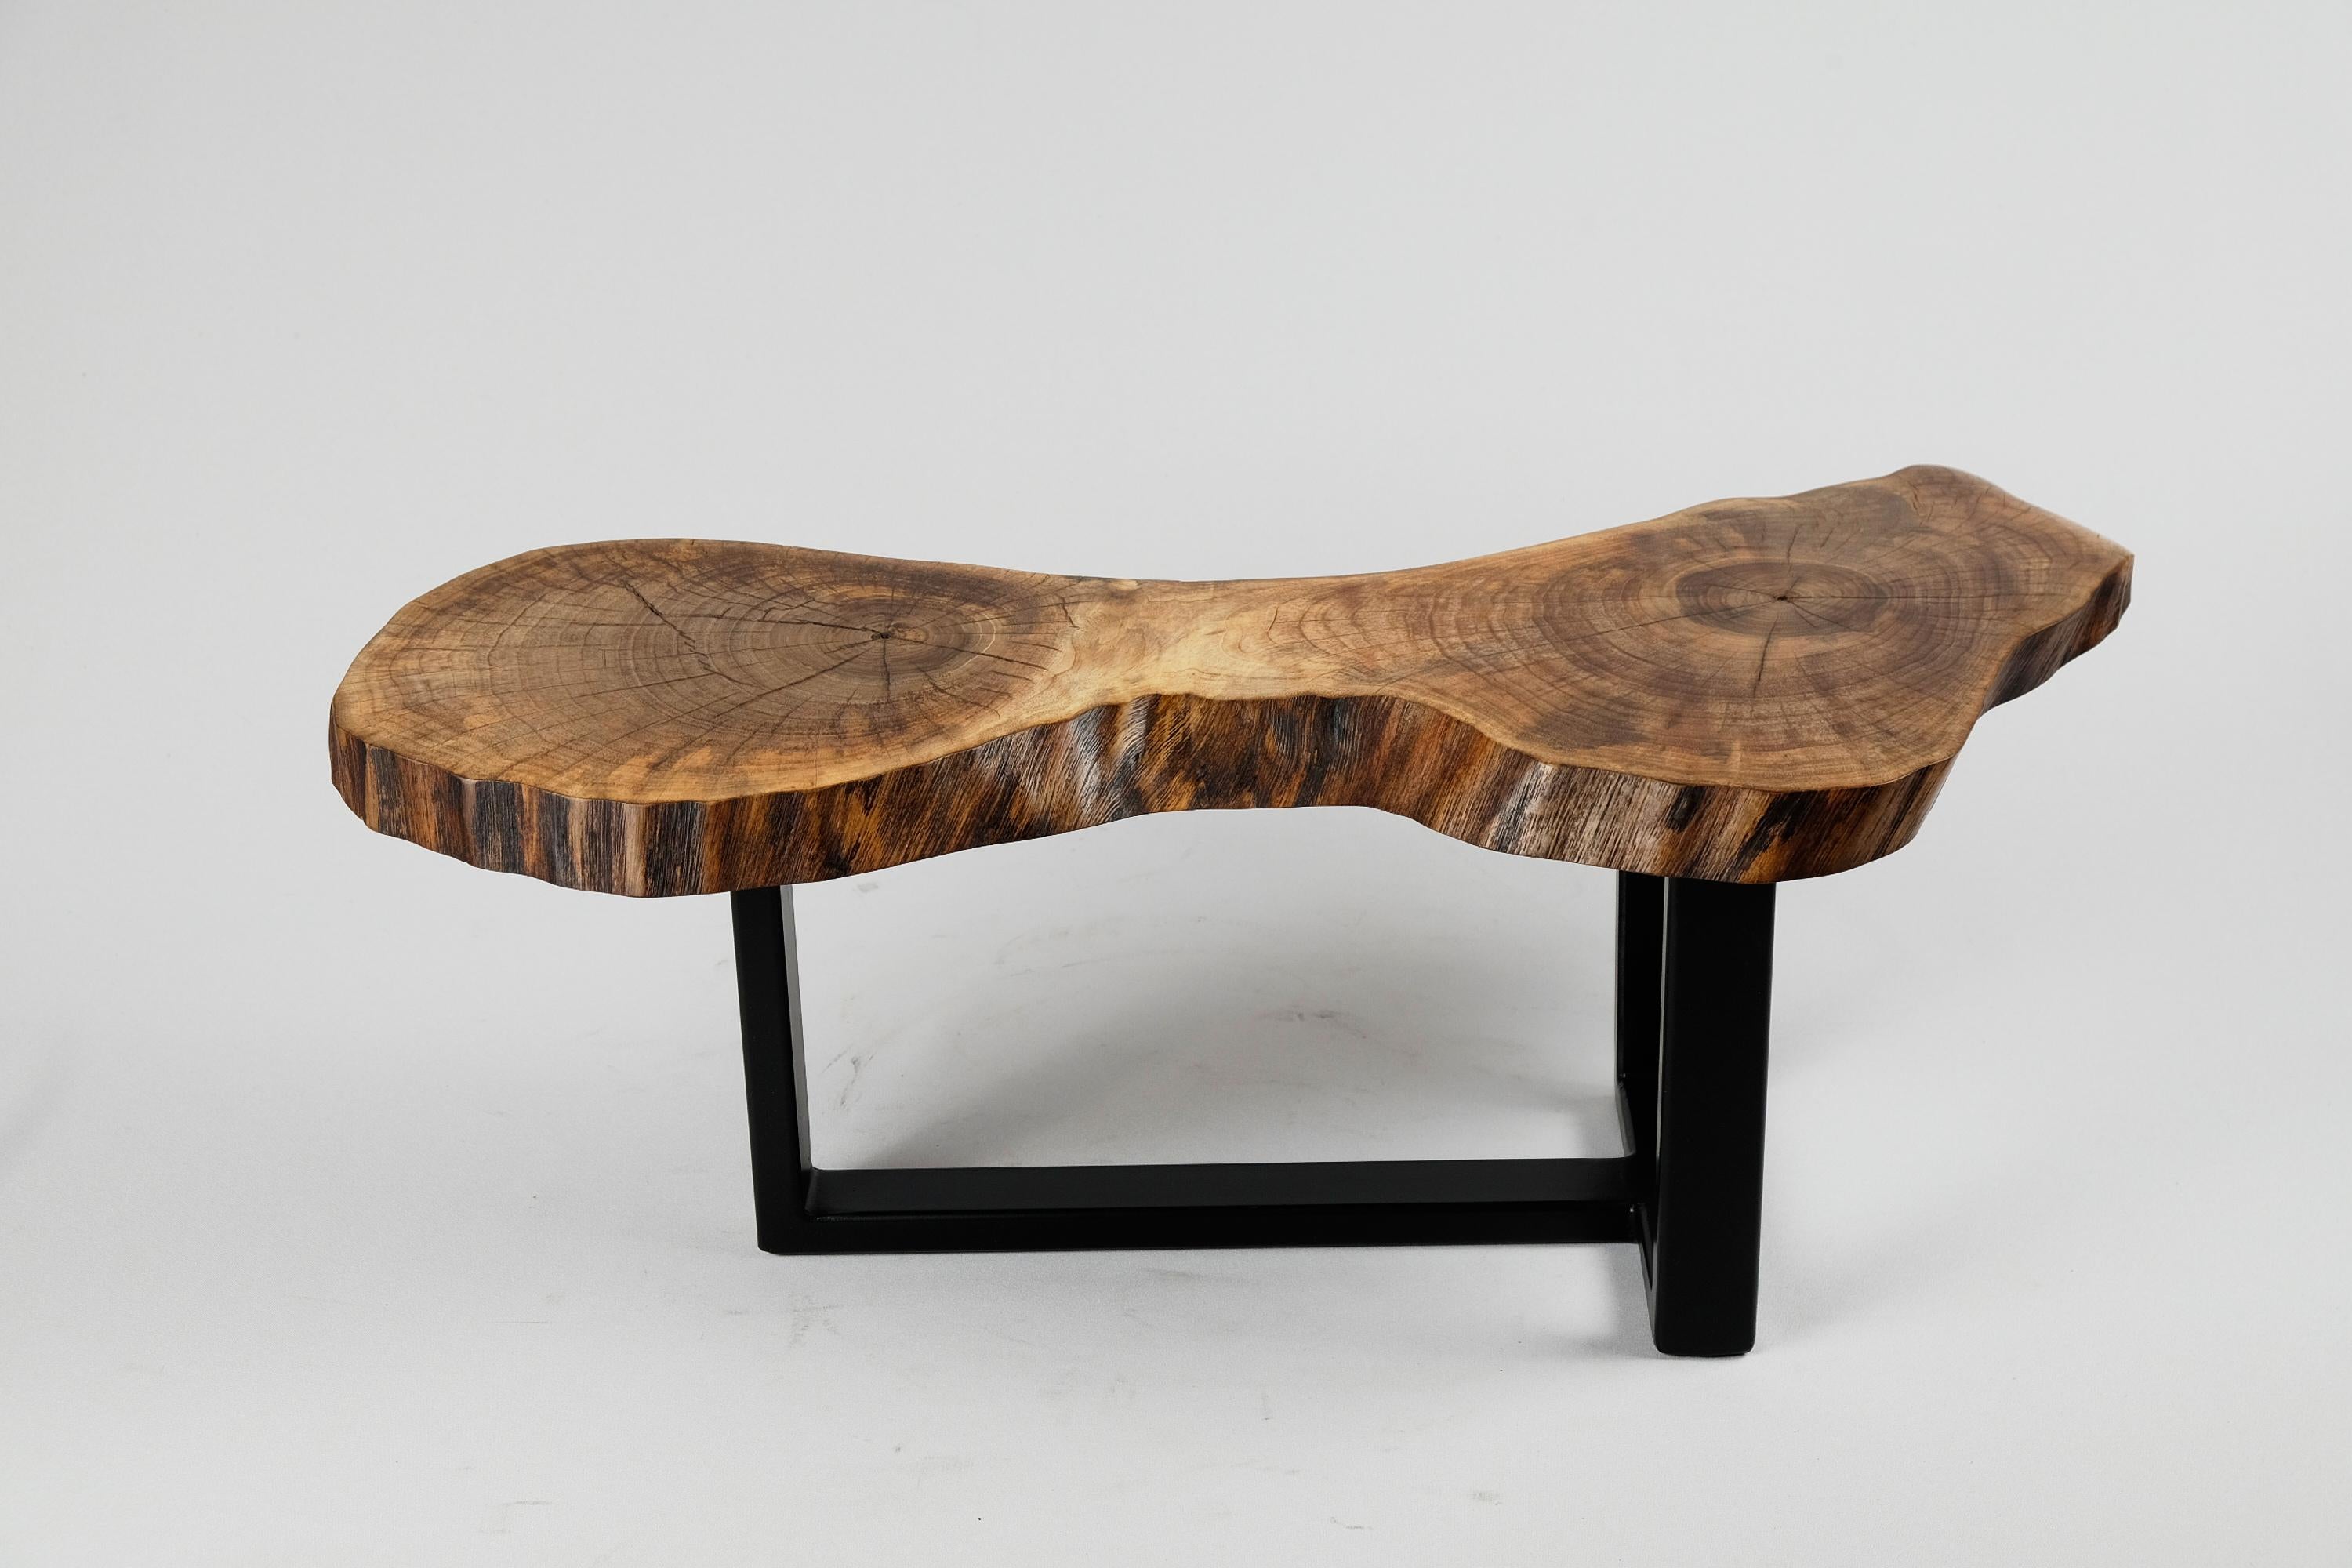 Unique and decorative side table. It is build in combination of walnut wood & steel, and protected with the highest quality oils, ensuring durability for generations. Such unique handmade design will highlight your interior and bring comfort to your